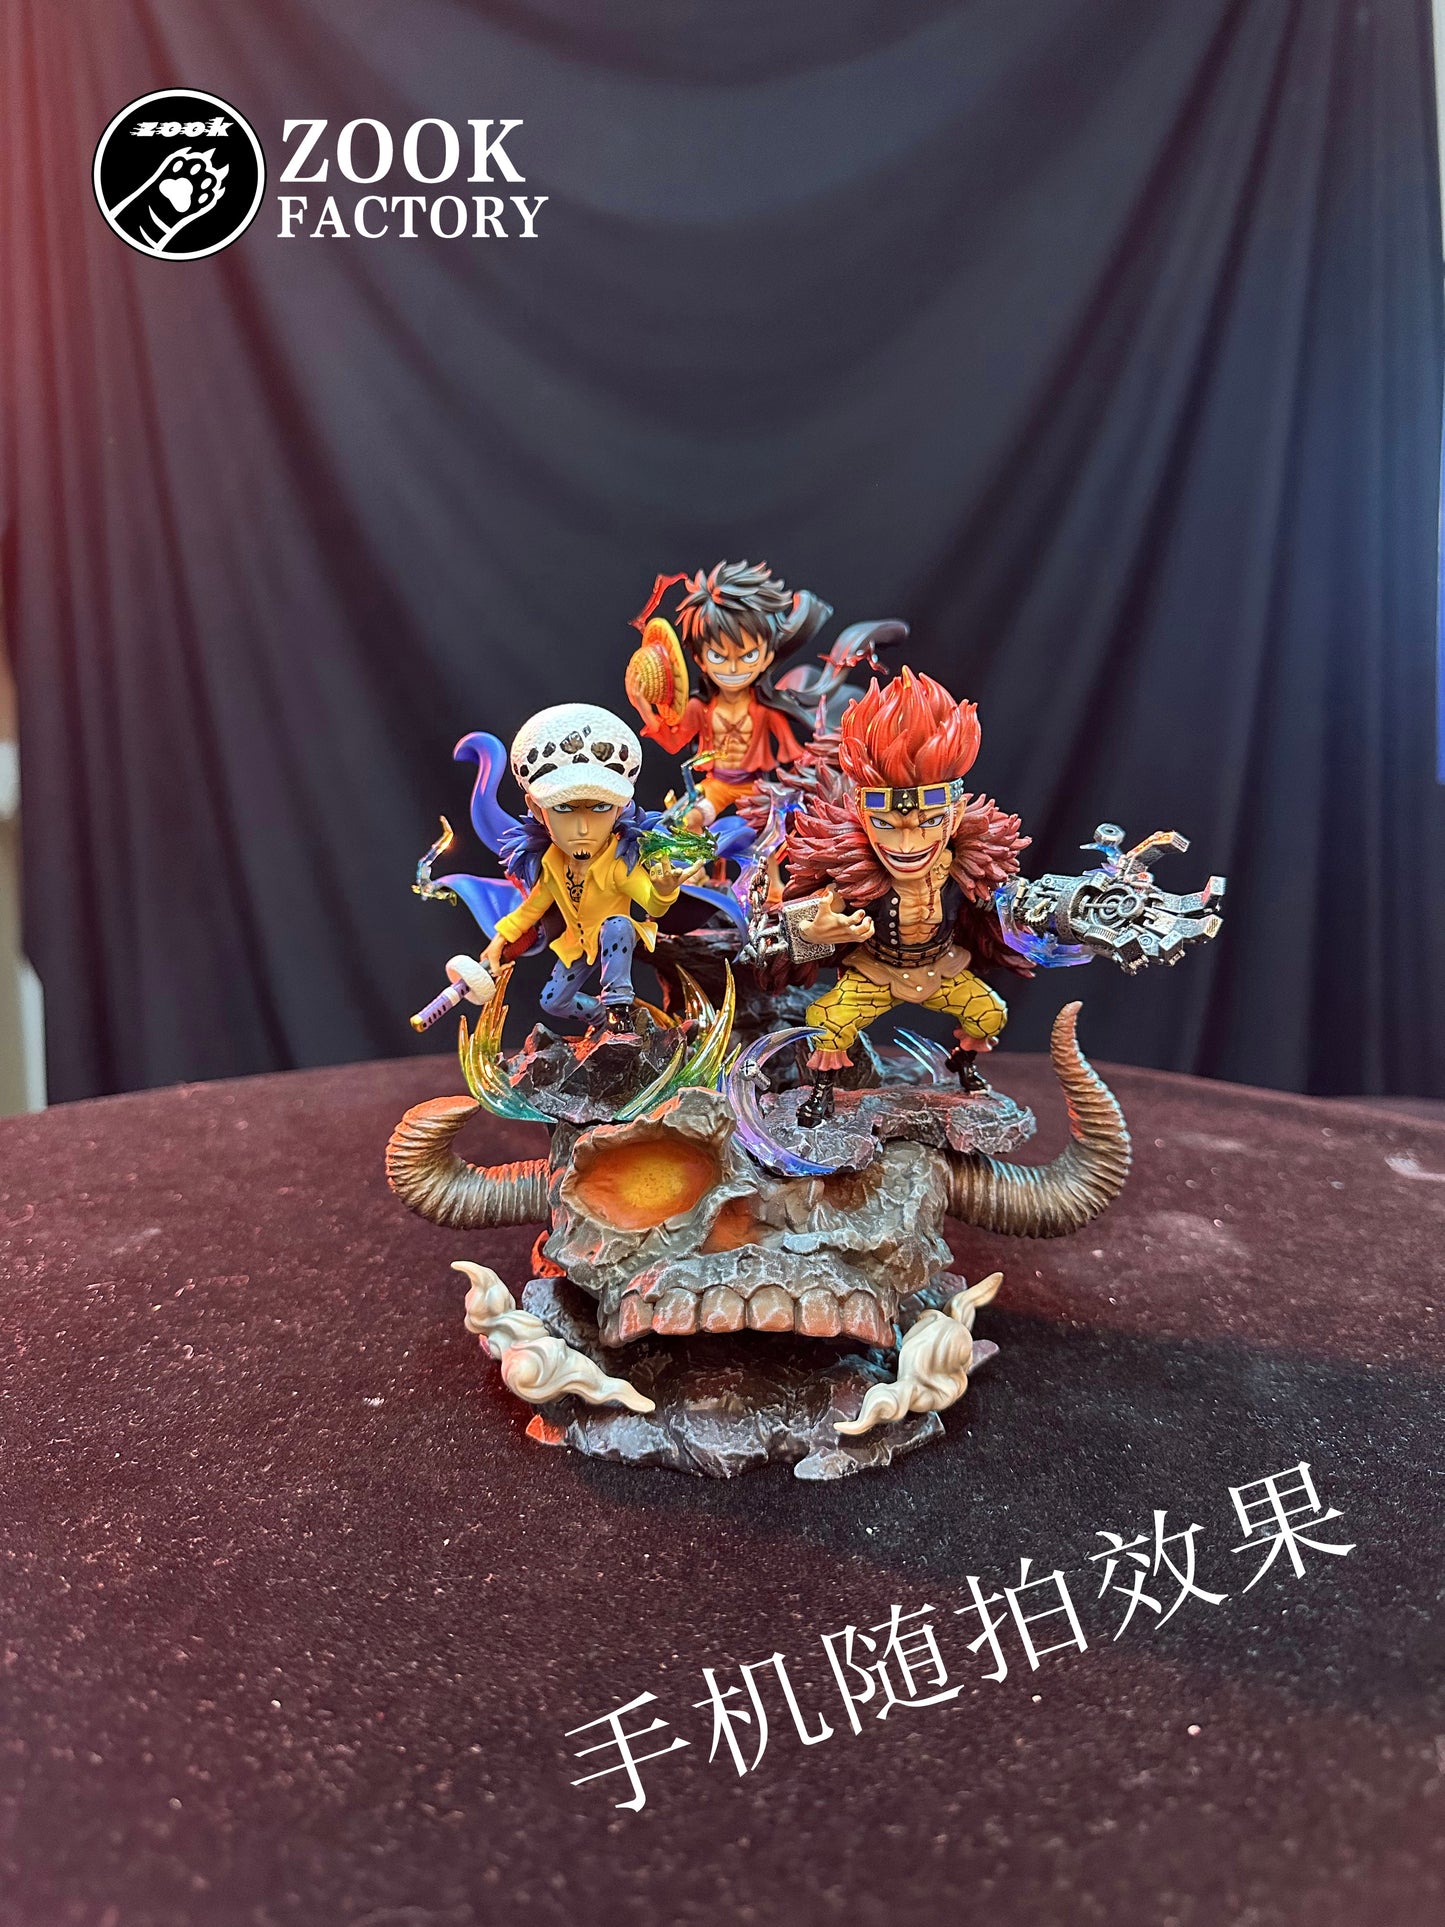 ZOOK FACTORY STUDIO – ONE PIECE: THE THREE SUPERNOVA CAPTAINS, LUFFY, LAW AND KID [SOLD OUT]